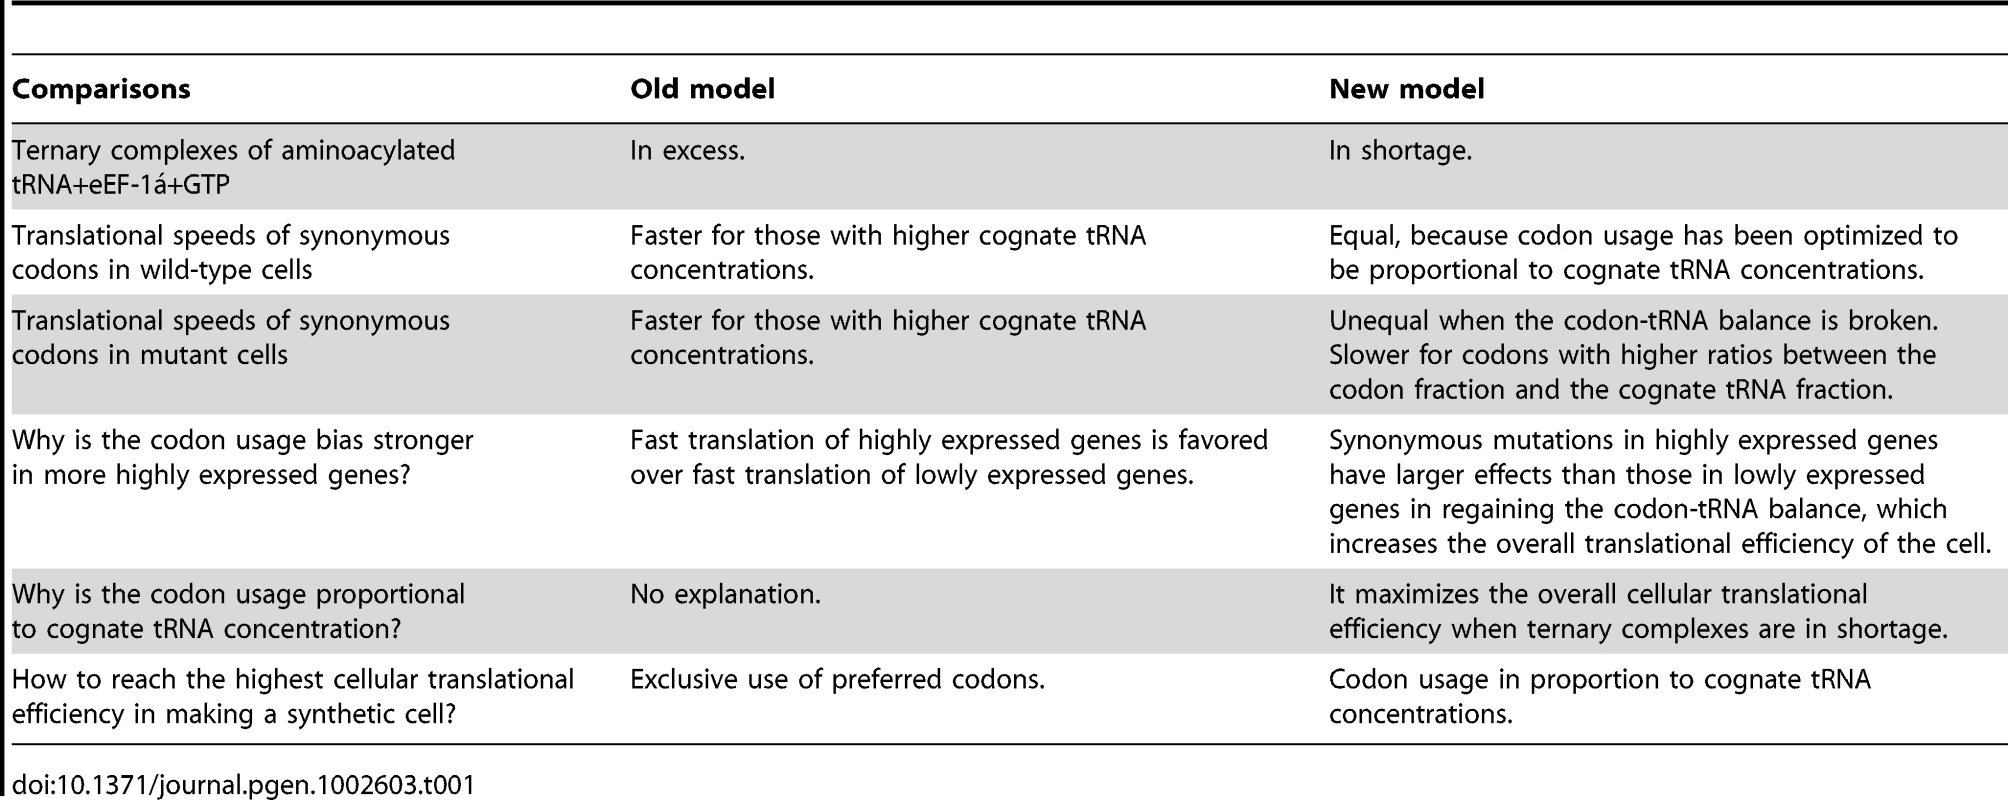 Comparison between the old and new models of translational efficiency by unequal codon usage.